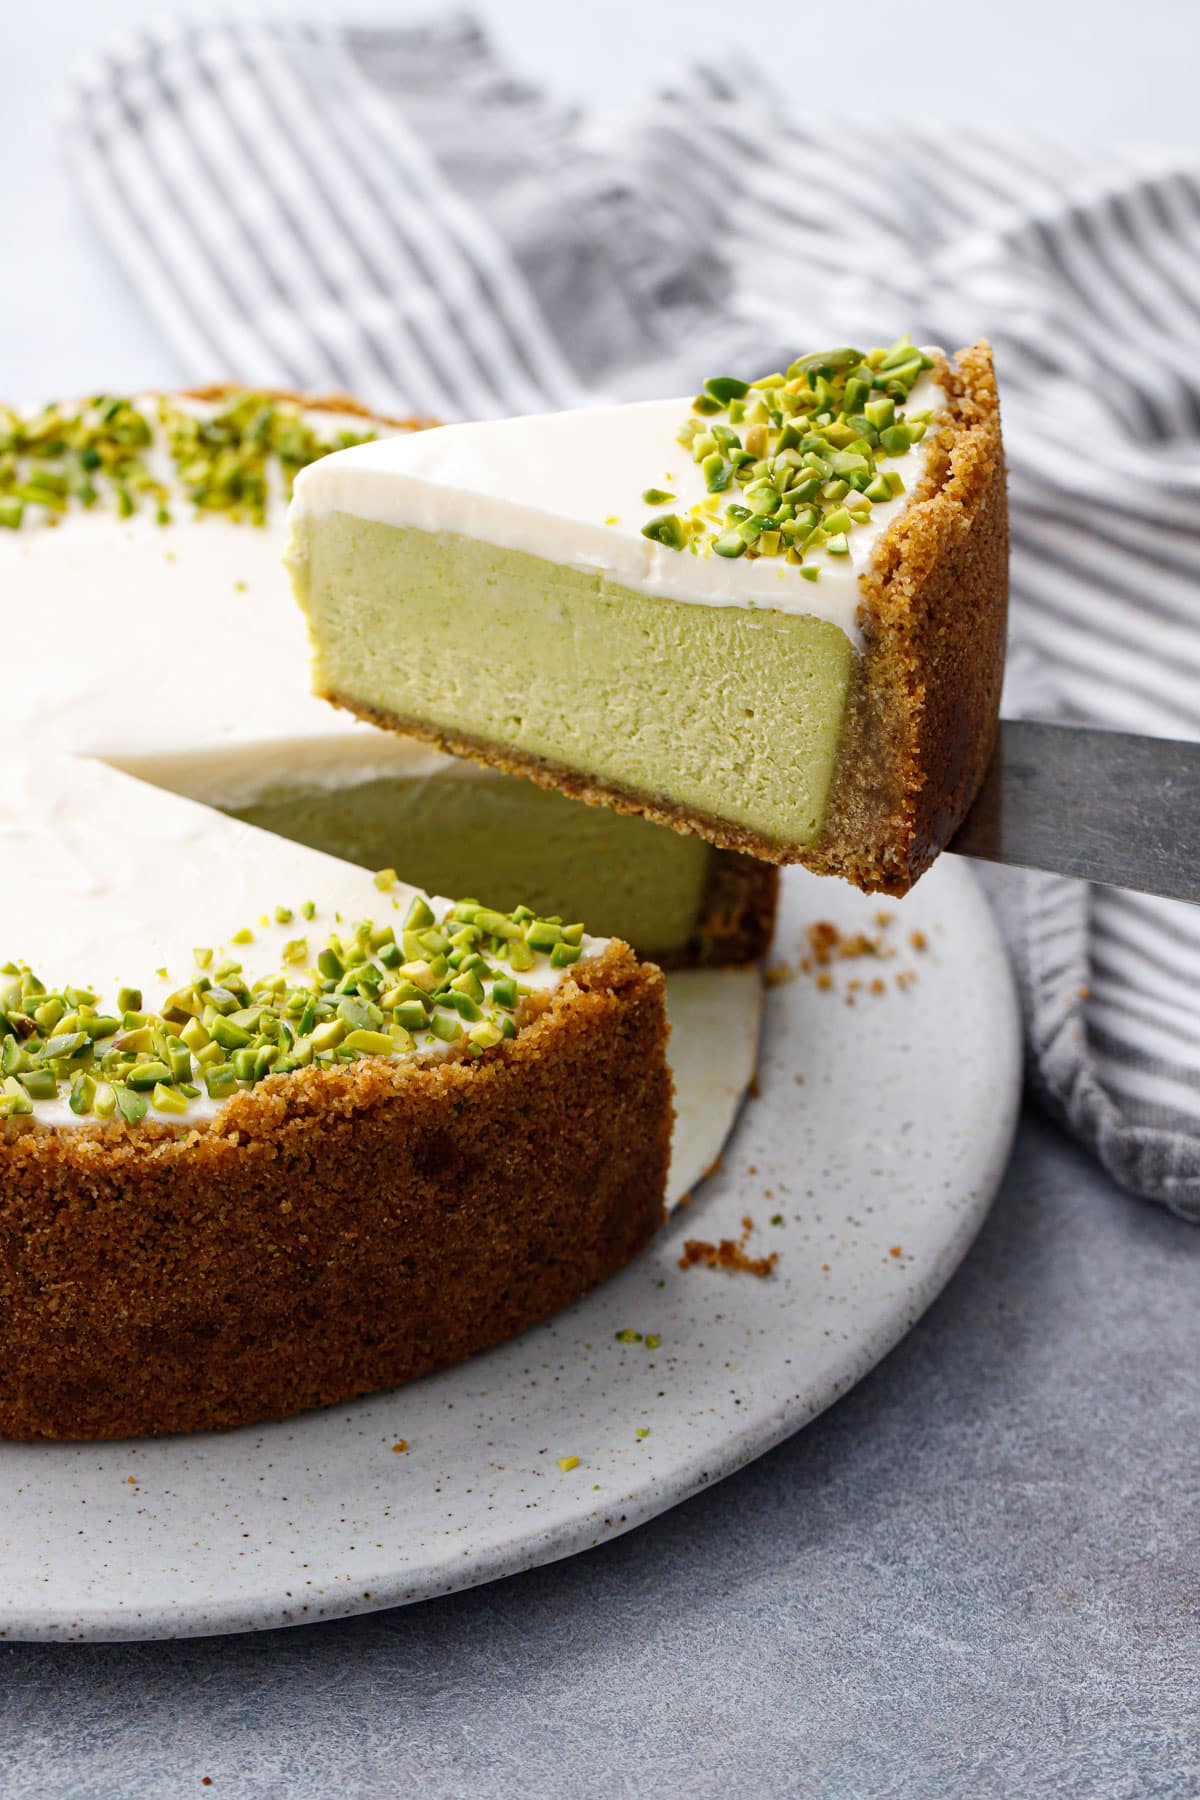 Lifting a slice of Pistachio Sour Cream Cheesecake showing the layers of green pistachio filling and sour cream topping.